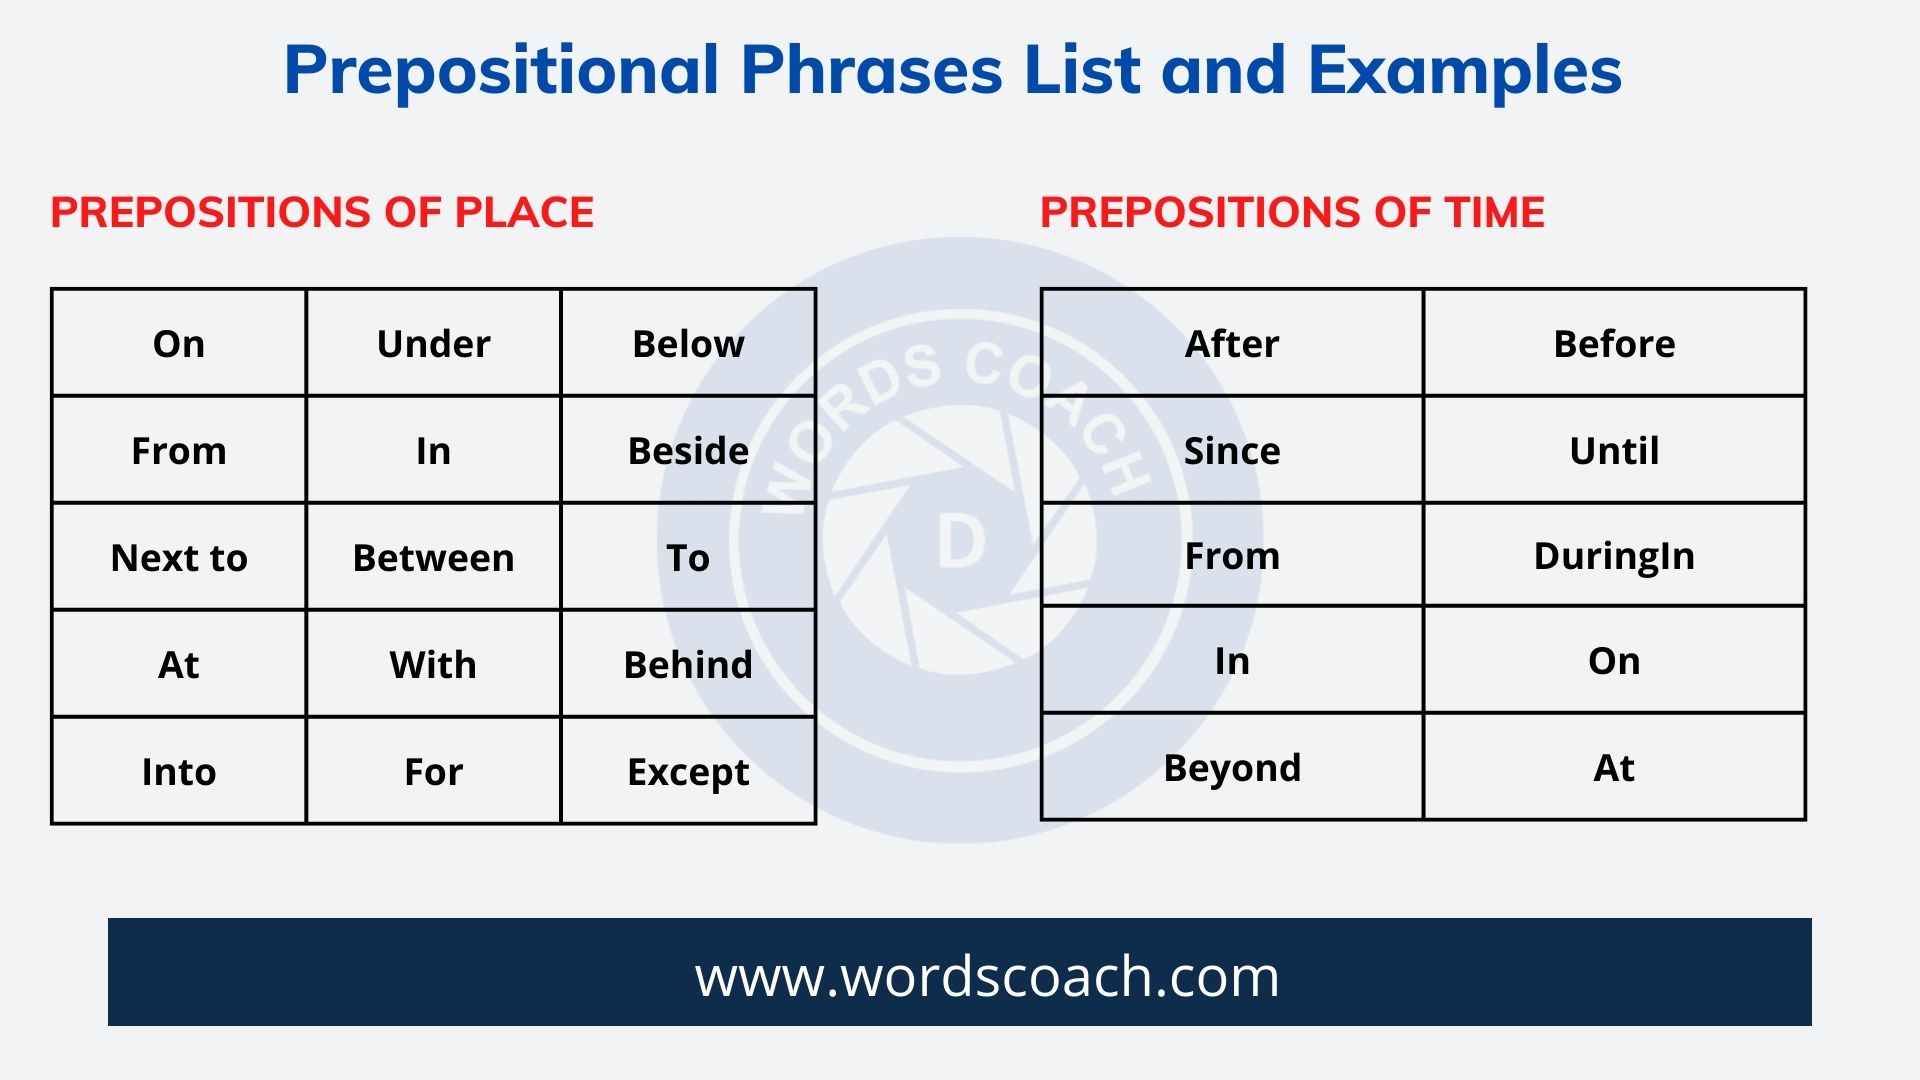 Prepositional Phrases List and Examples - wordscoach.com